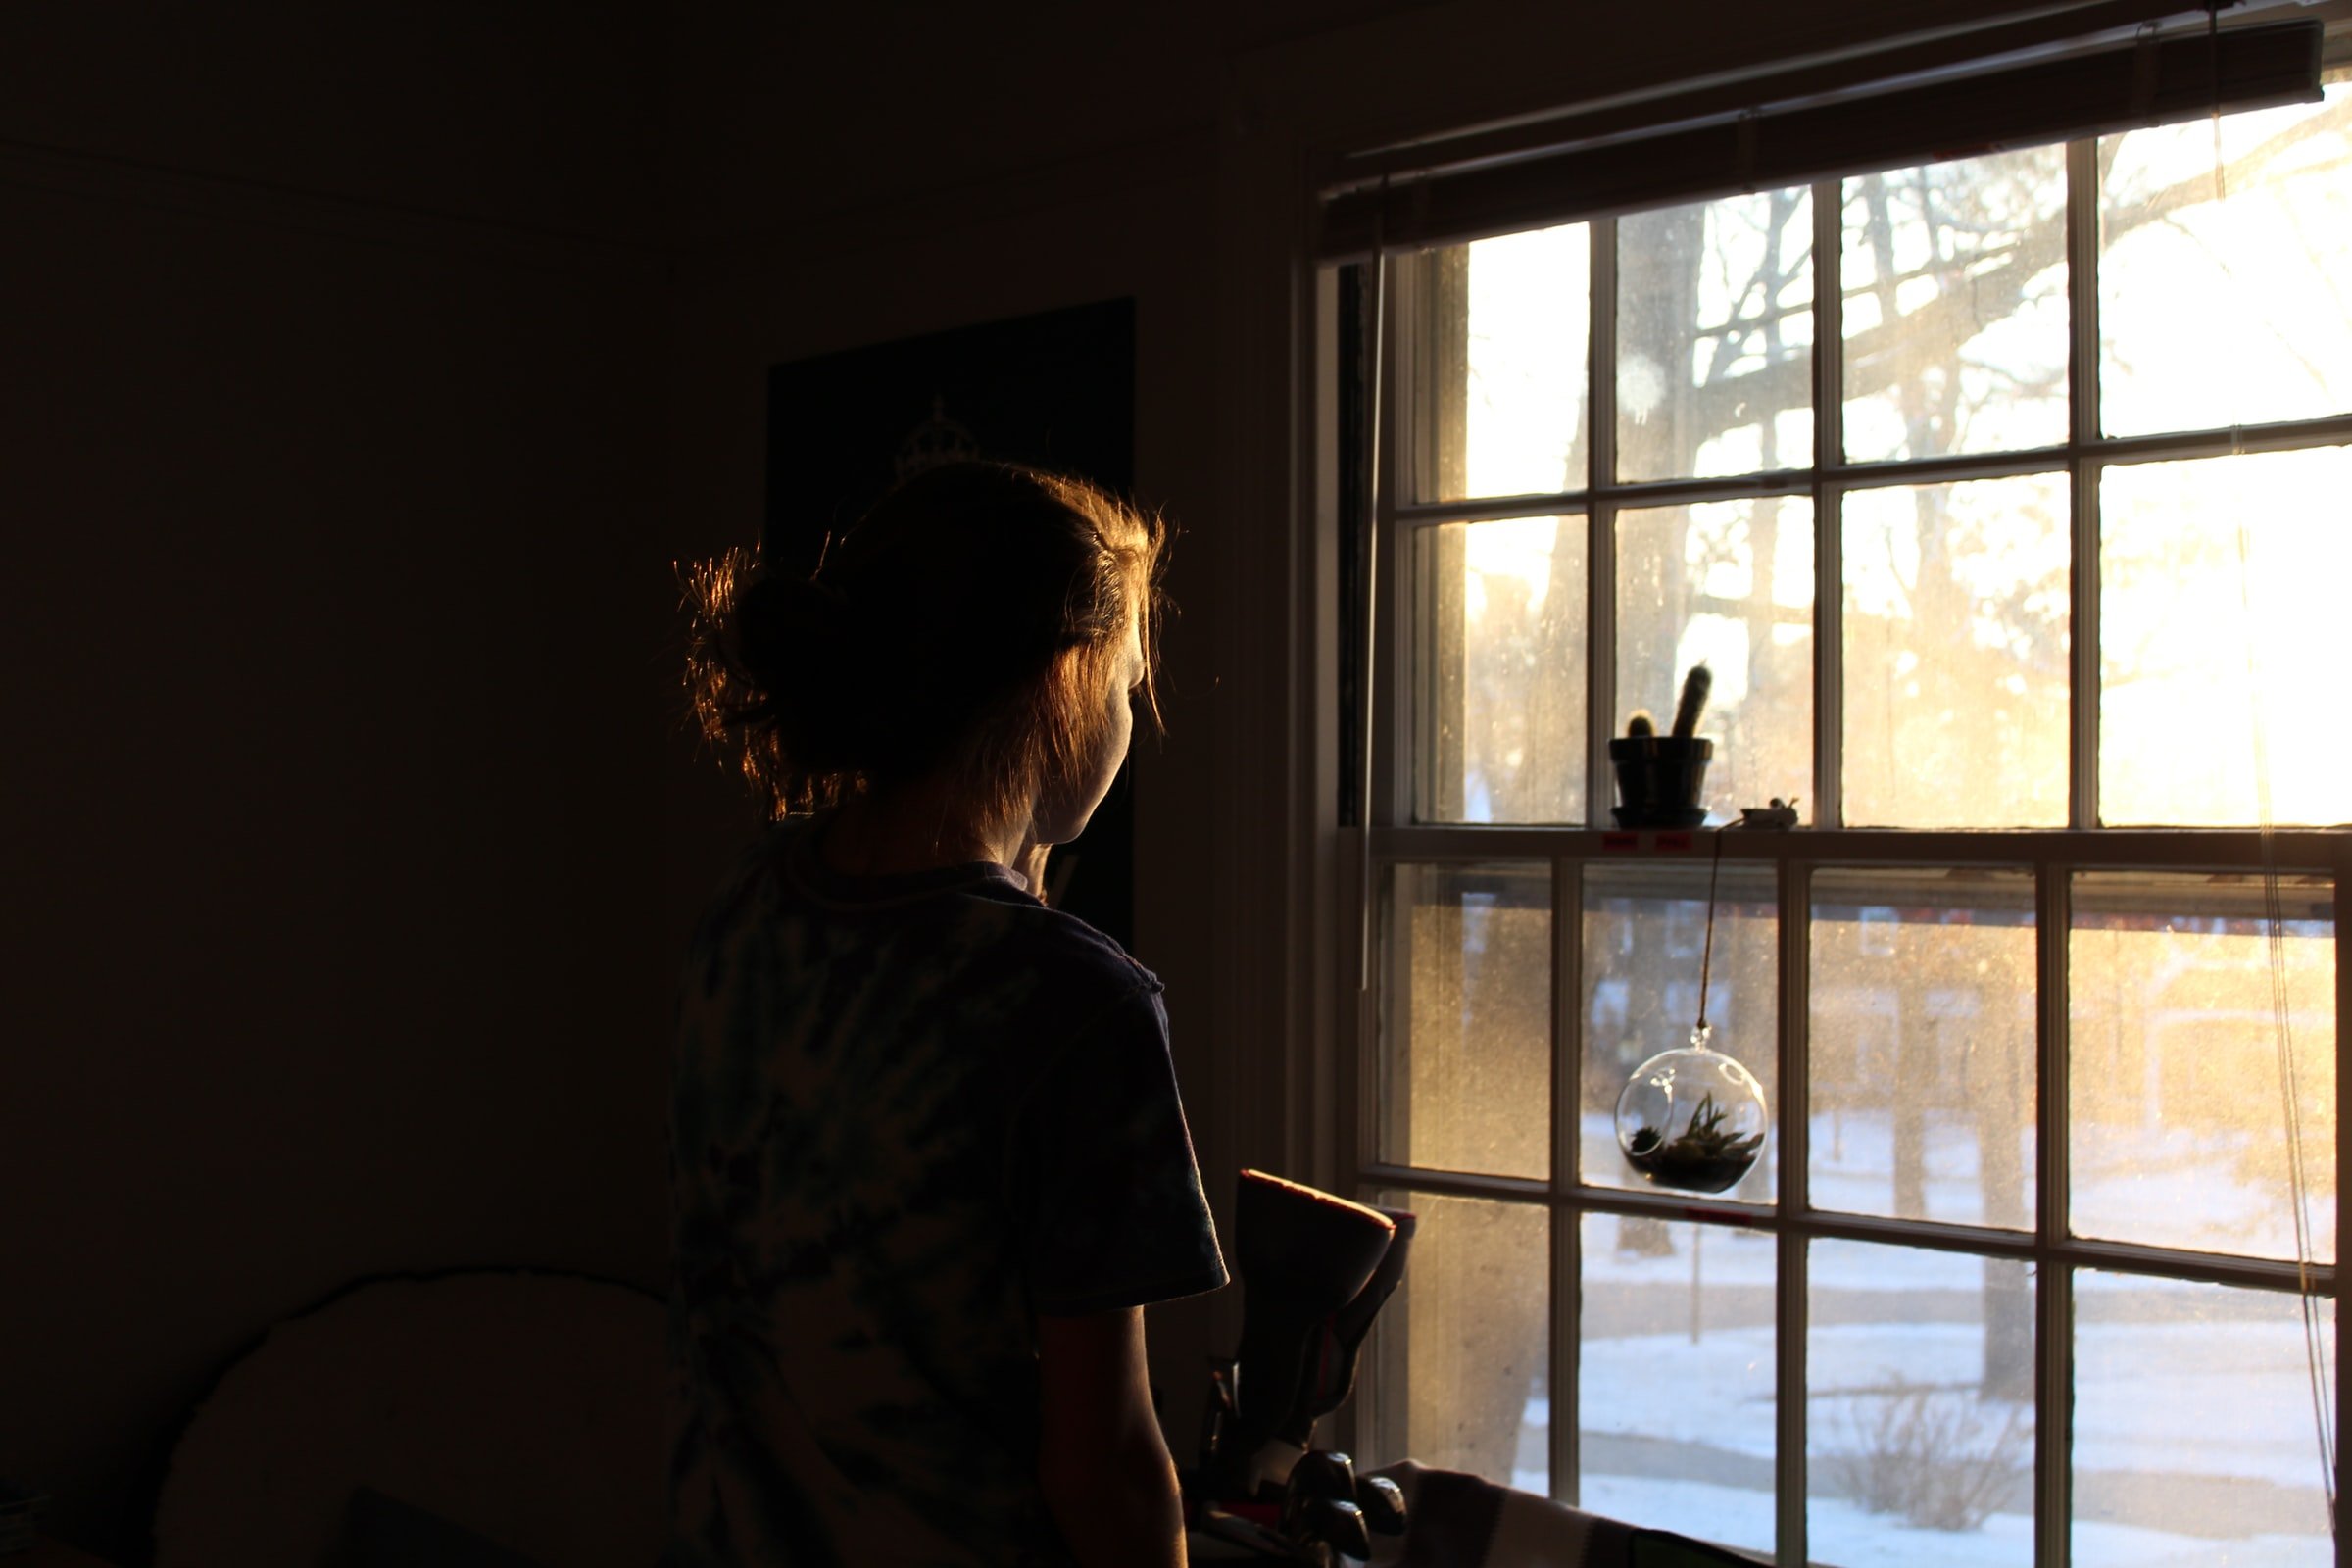 A girl looking out of the window. | Source: Unsplash